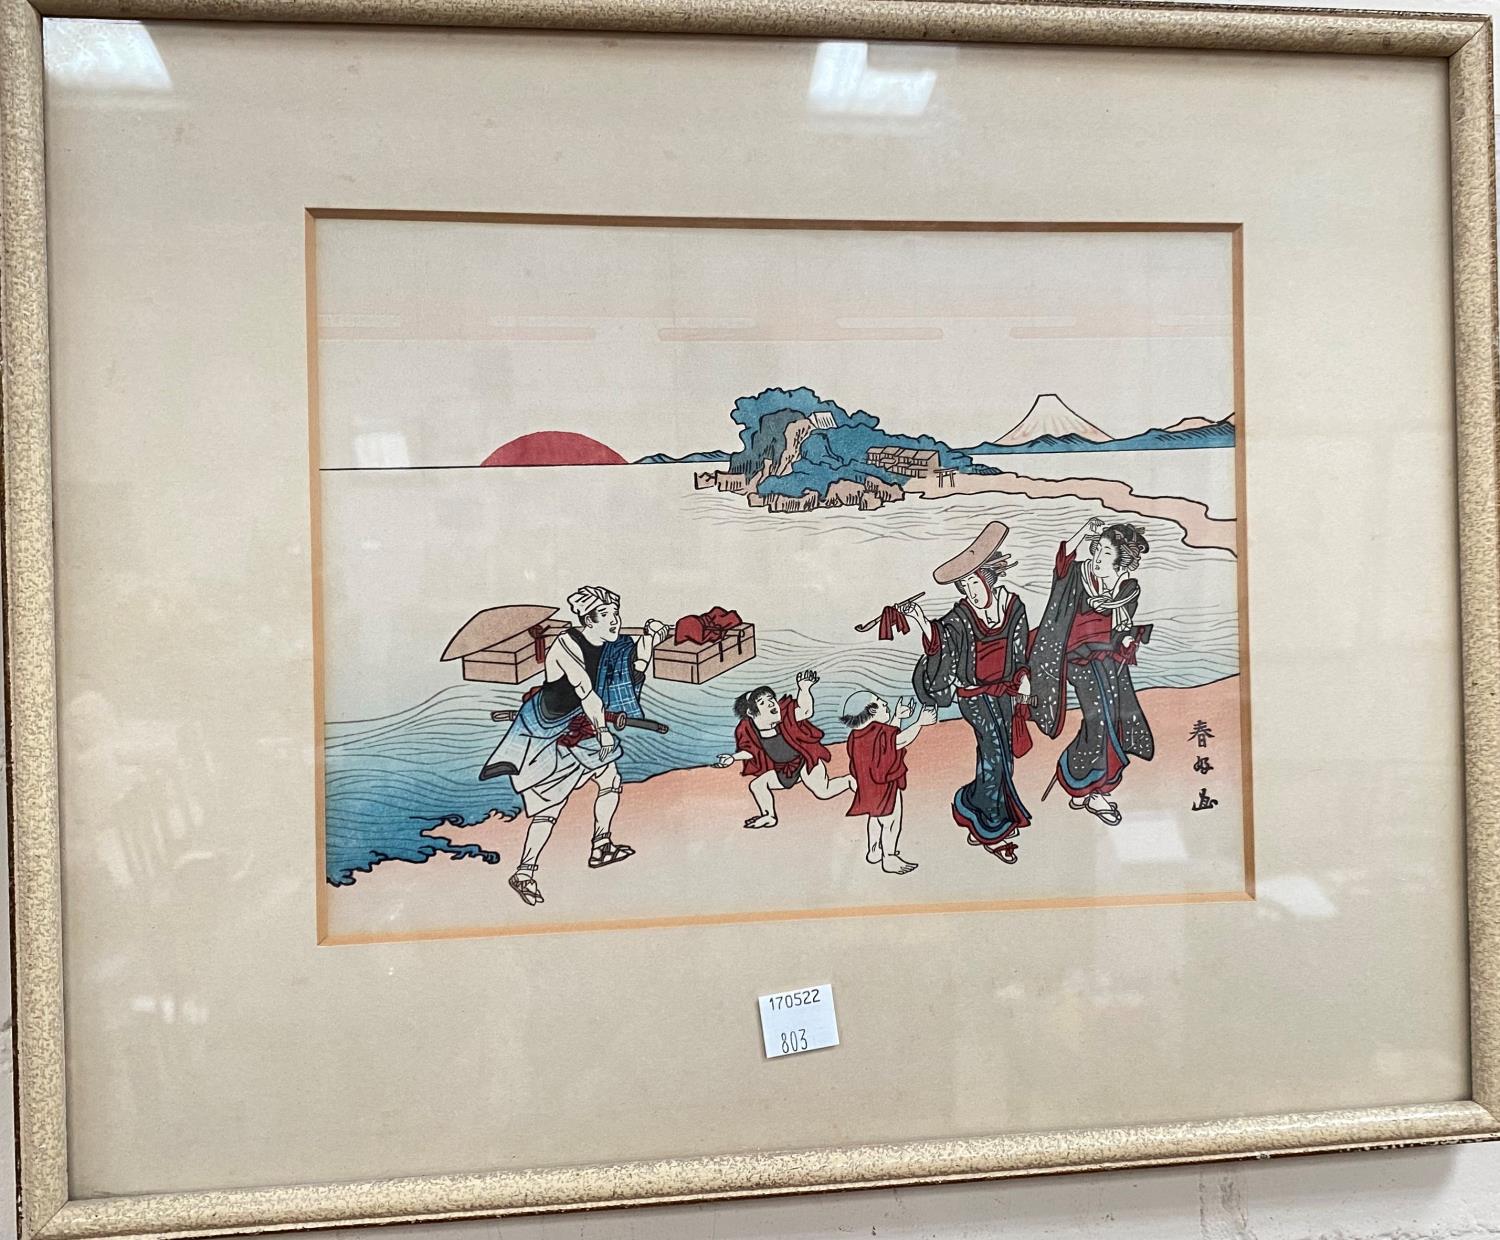 Early 20th Century:  shoreline scenes with figures working, pair of Japanese prints, 3 character - Image 2 of 2